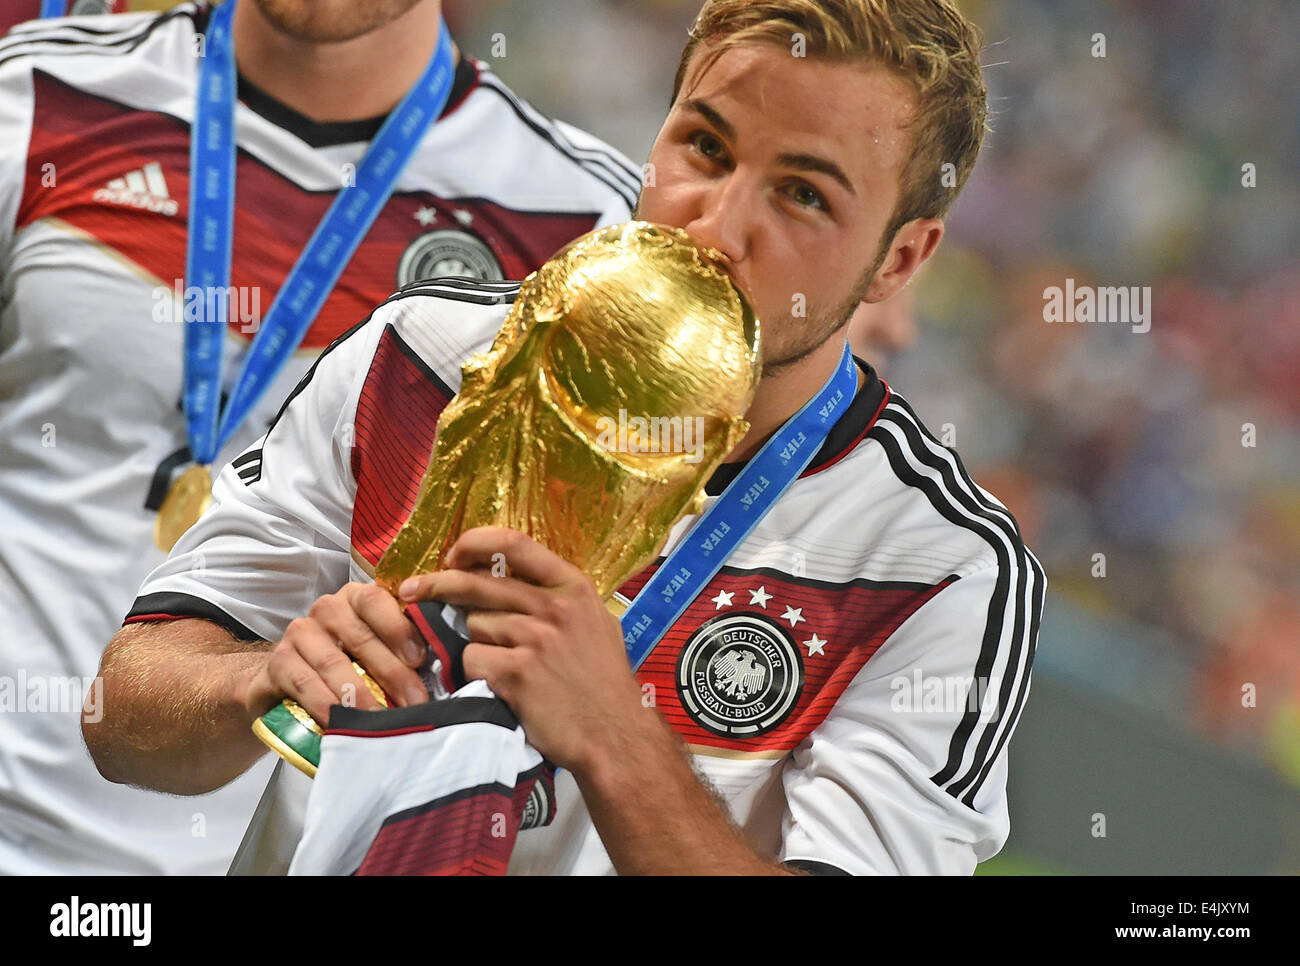 Rio de Janeiro, Brazil. 13th July, 2014. Mario Goetze of Germany kisses the World Cup trophy after winning the FIFA World Cup 2014 final soccer match between Germany and Argentina at the Estadio do Maracana in Rio de Janeiro, Brazil, 13 July 2014. Photo: Marcus Brandtt/dpa/Alamy Live News Stock Photo